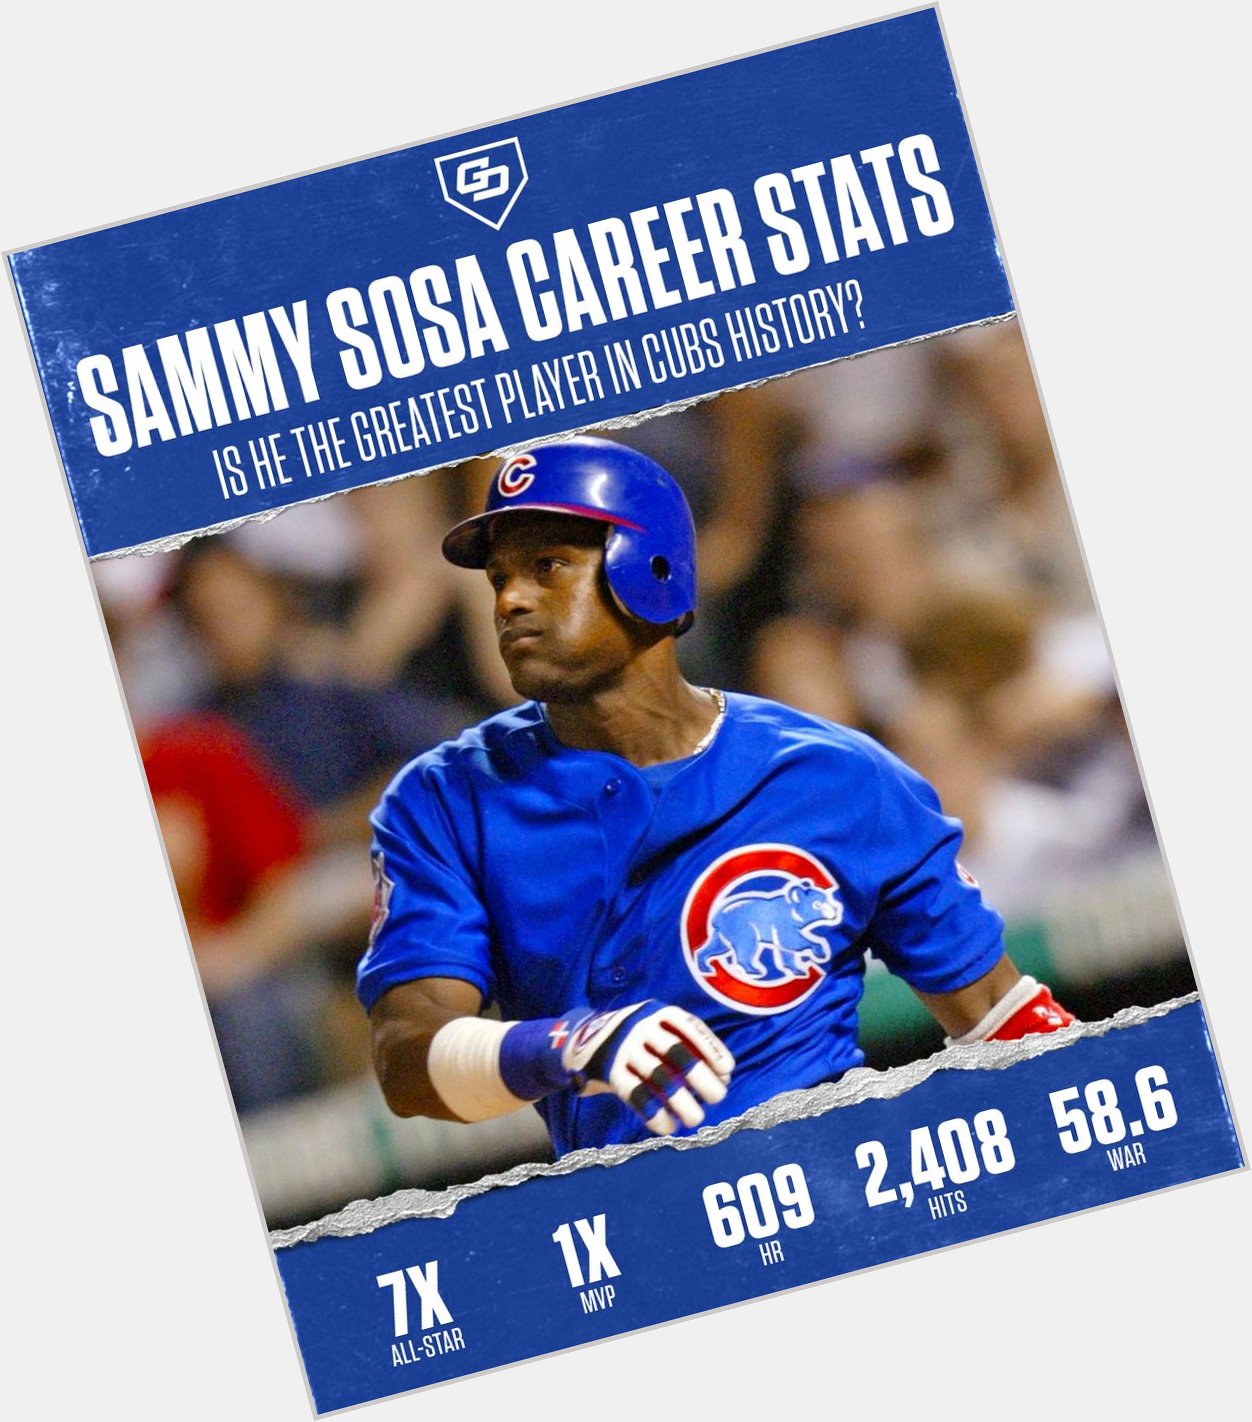 Happy birthday, Sammy Sosa!

Where does he rank among the all-time great Cubs? 